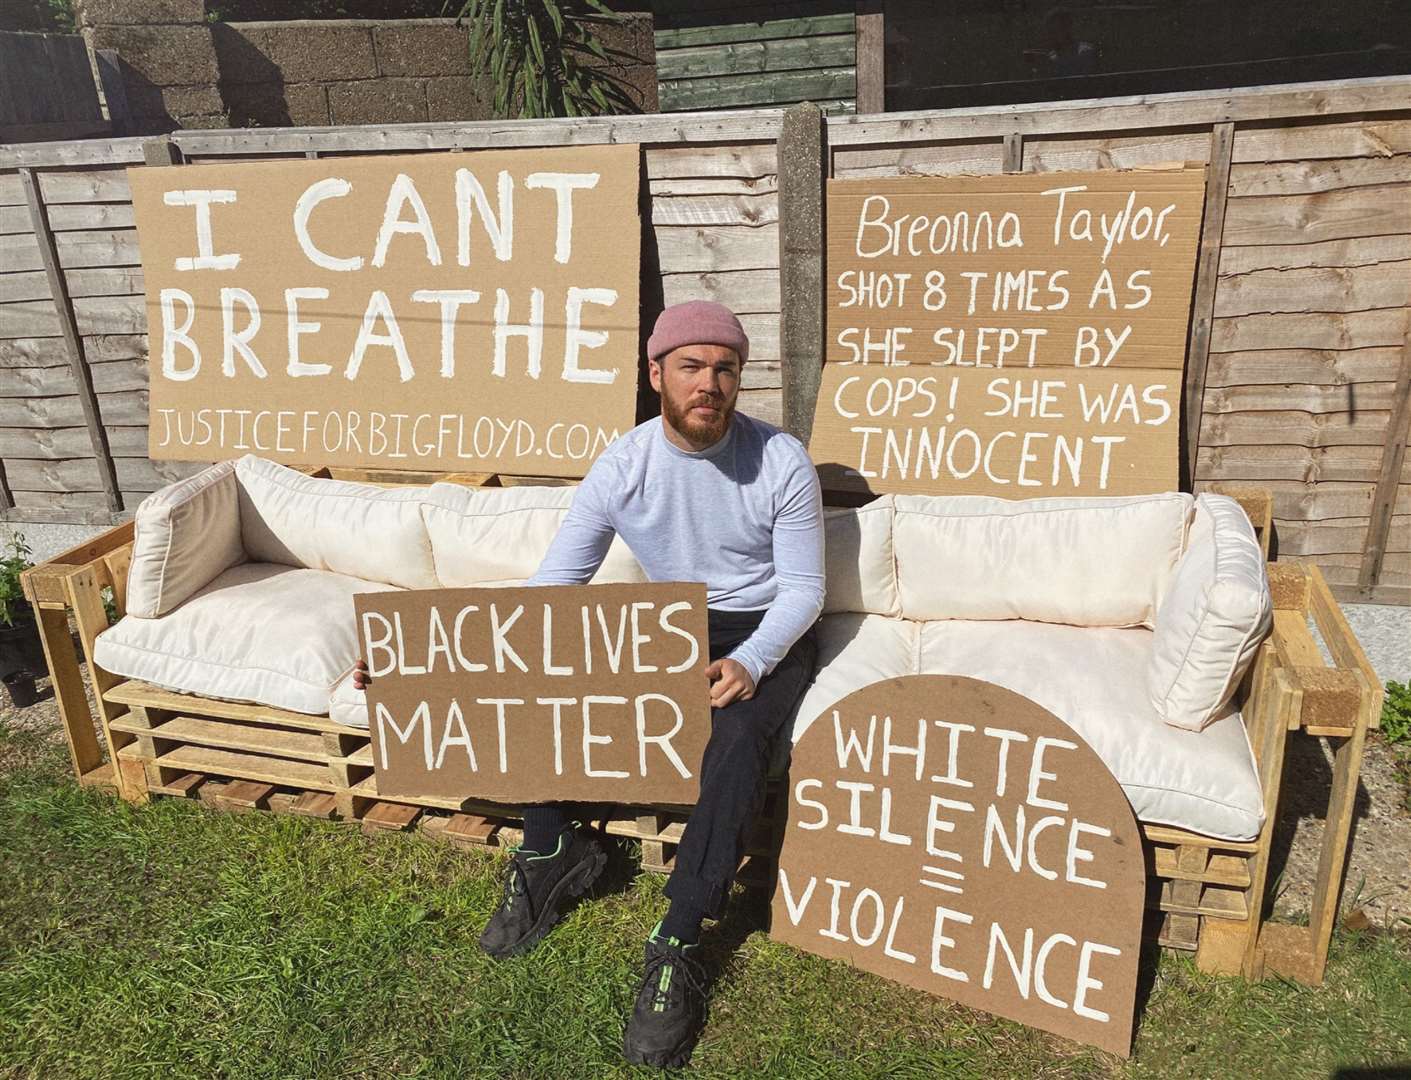 Lewis Foord wants more people to understand white privilege and the Black Lives Matter movement